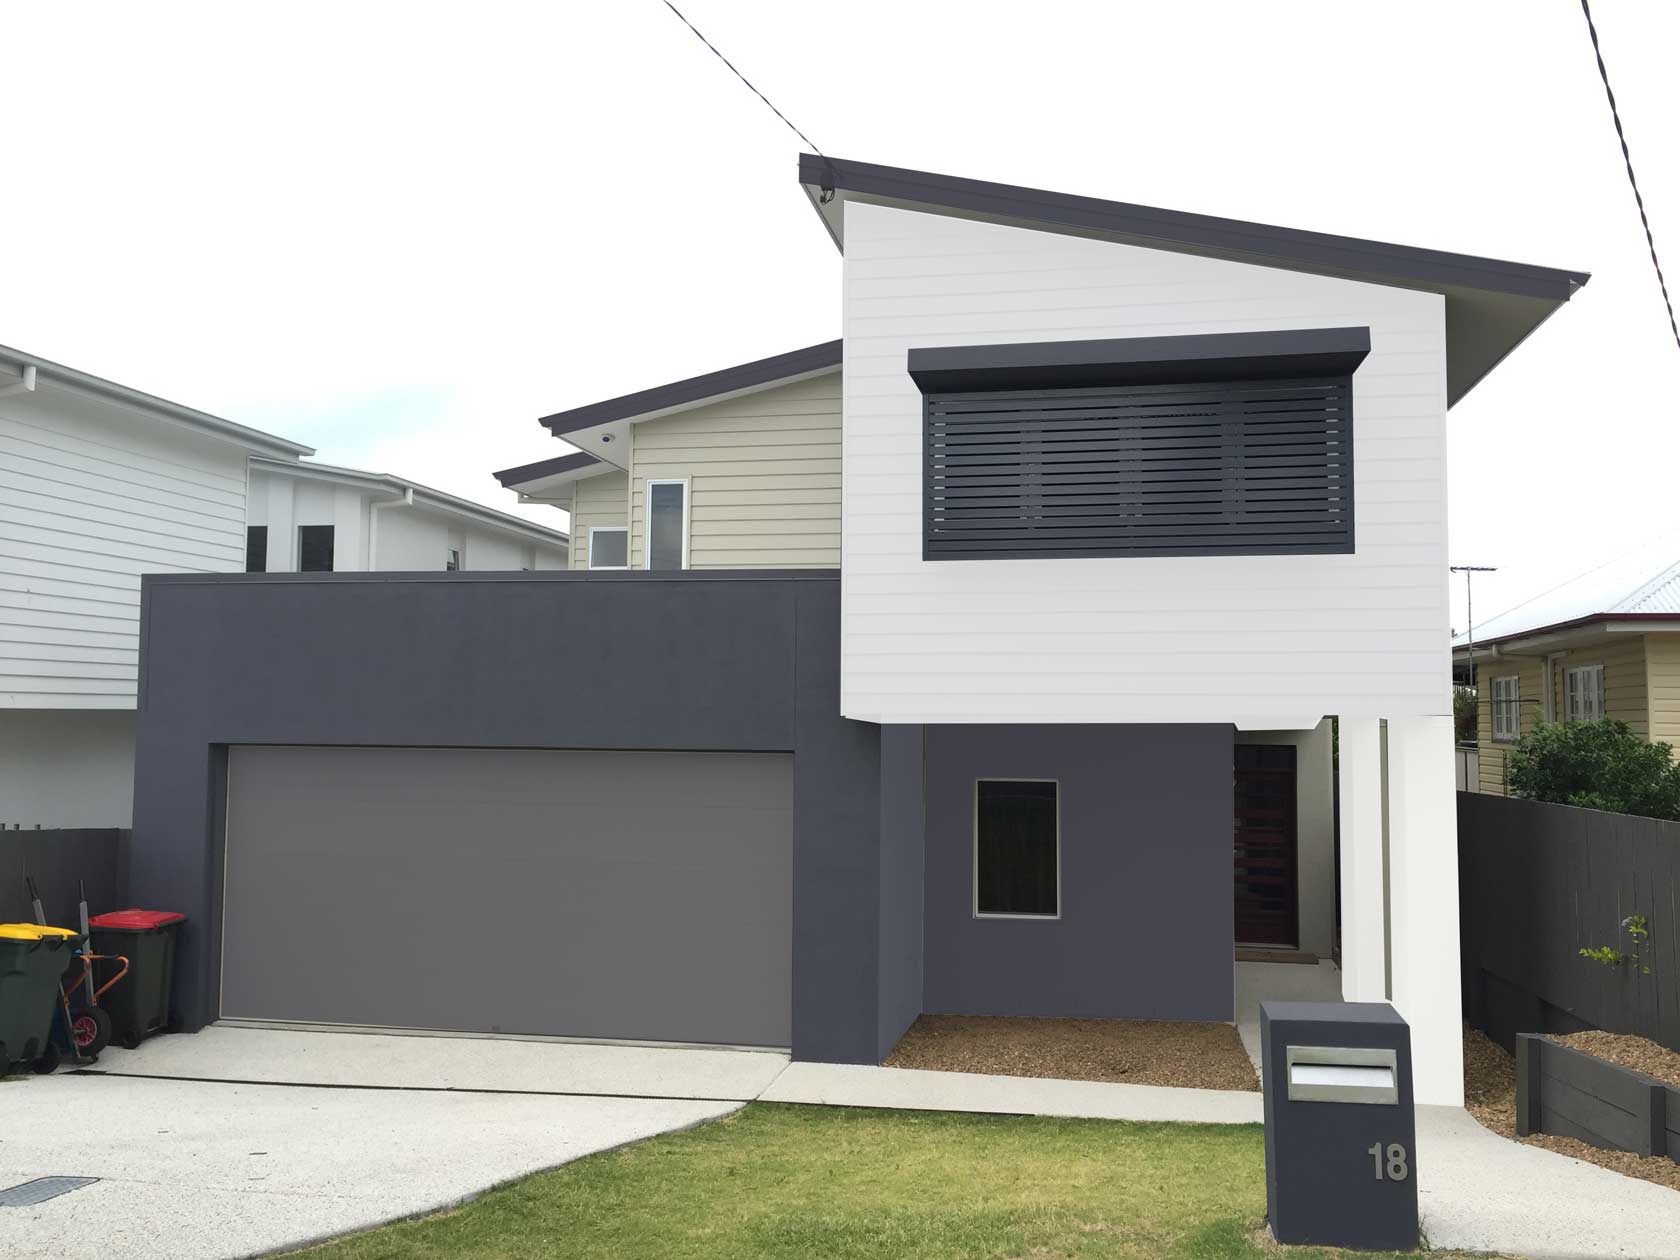 Anderson-project-diary-existing-house-navy-white-exterior-house-colour-scheme